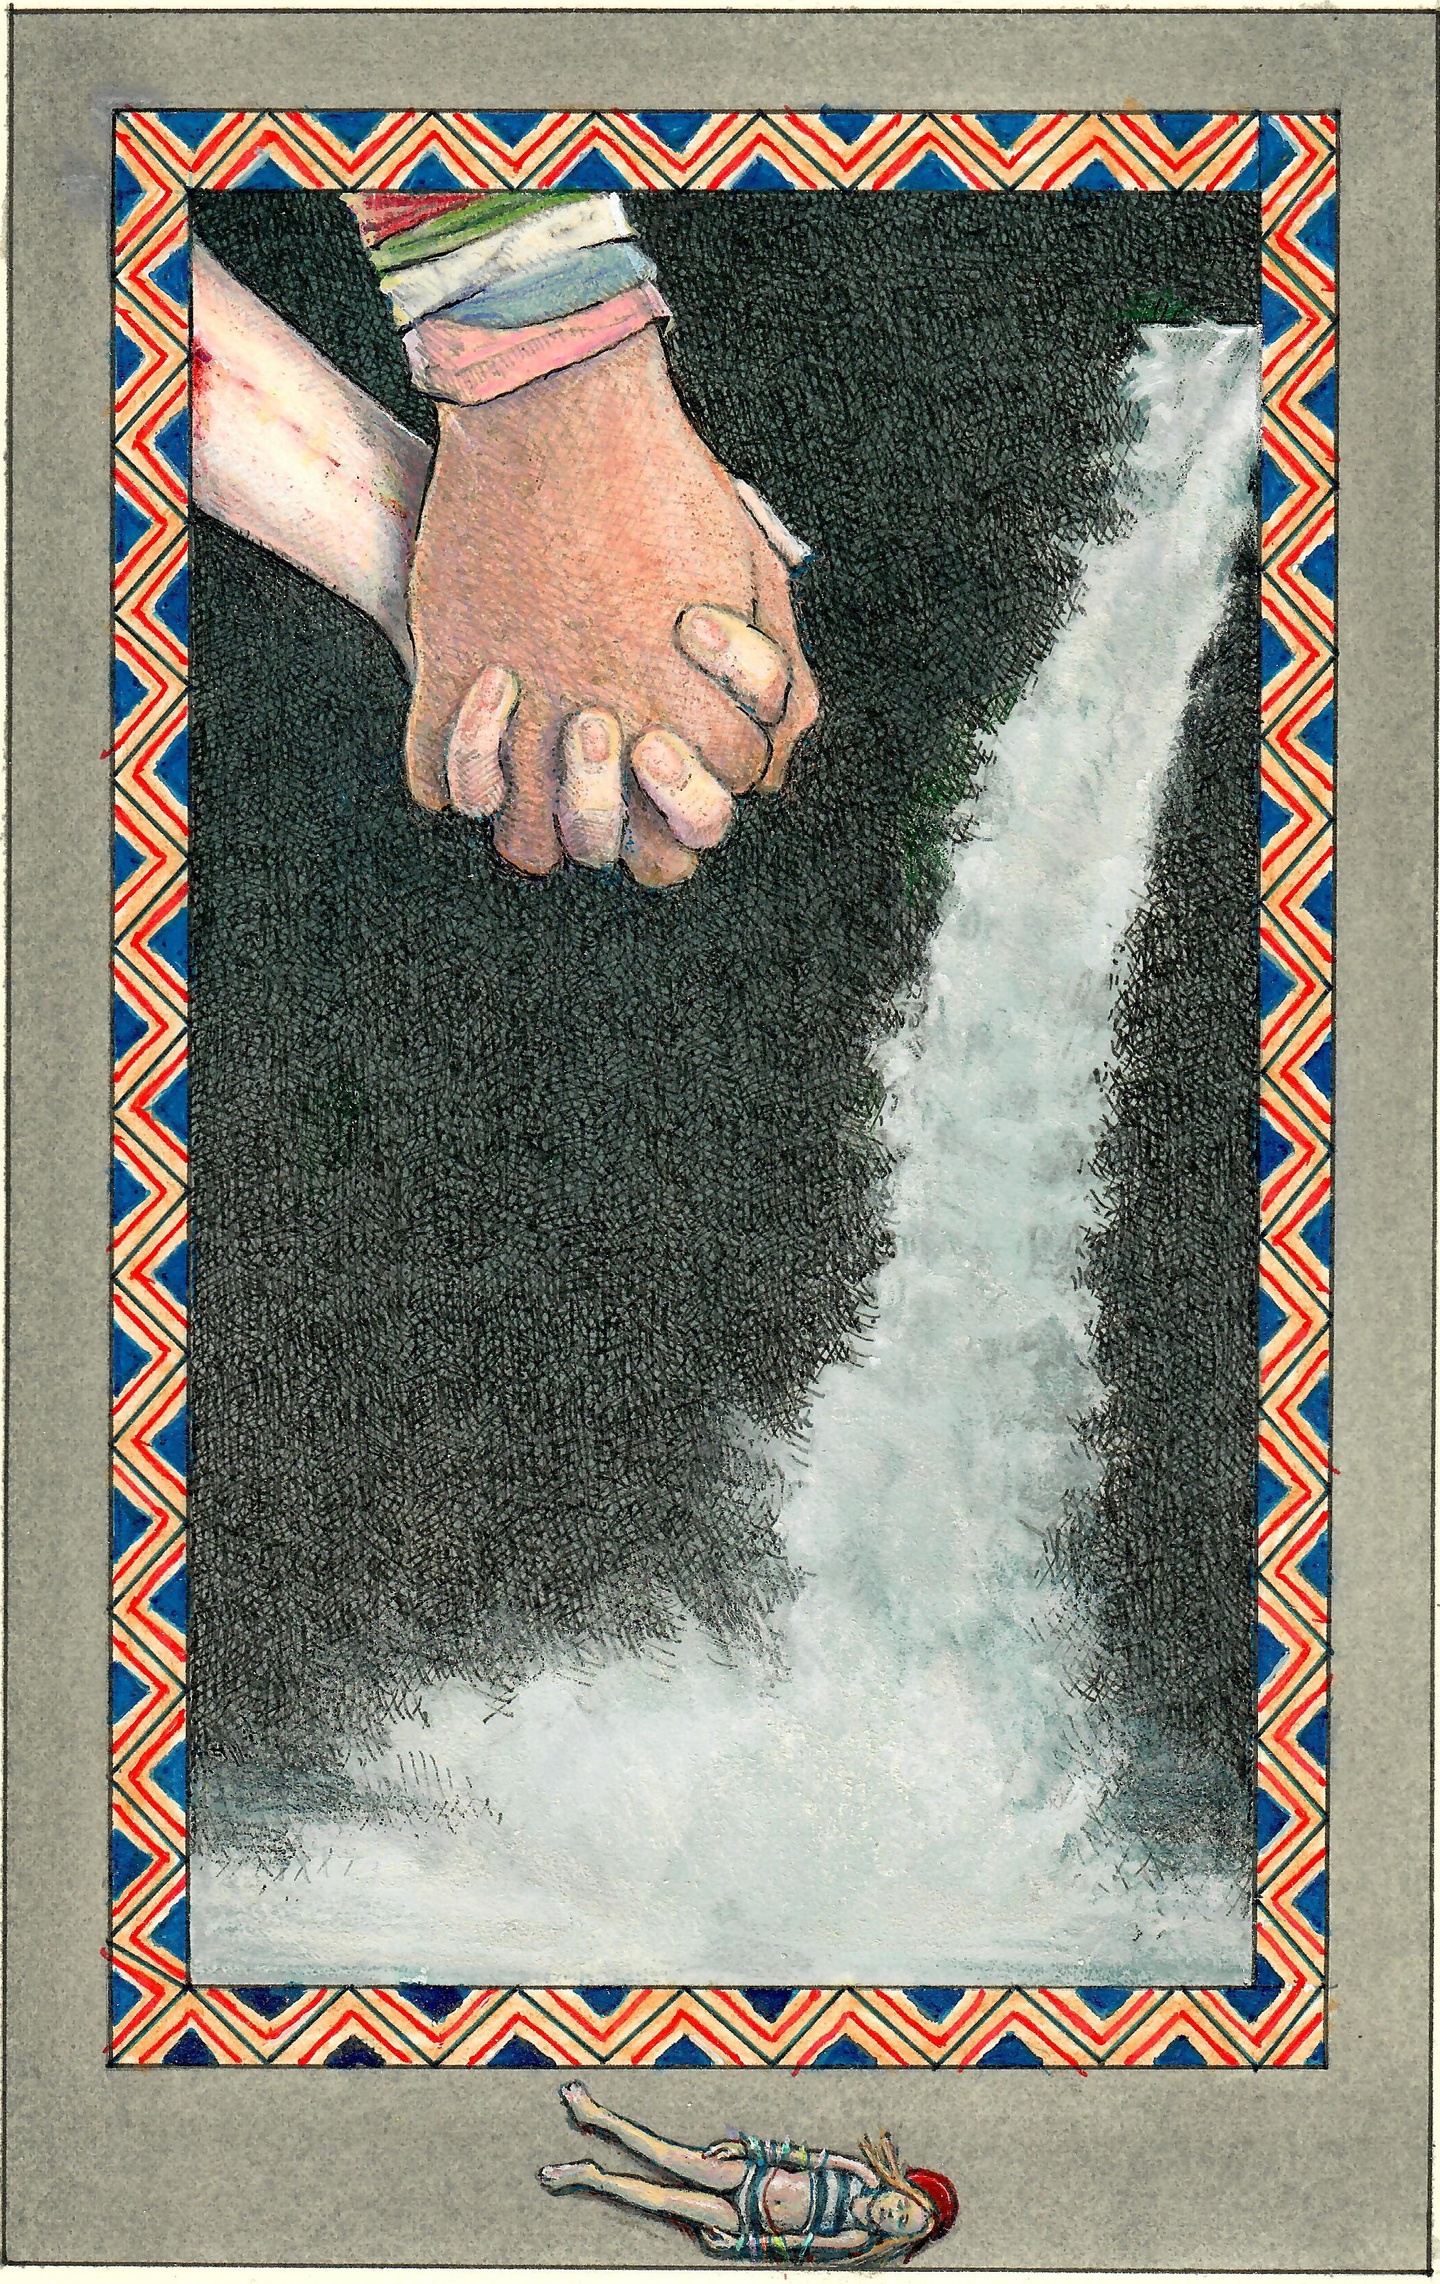 Two people holding hands, their interlocked hands only visible in the upper left corner, framed by a geometric border in peach/cream, red, green, and blue, around which is a gray background. The two hands are above a waterfall; a person lays on the exterior gray border, at the center.